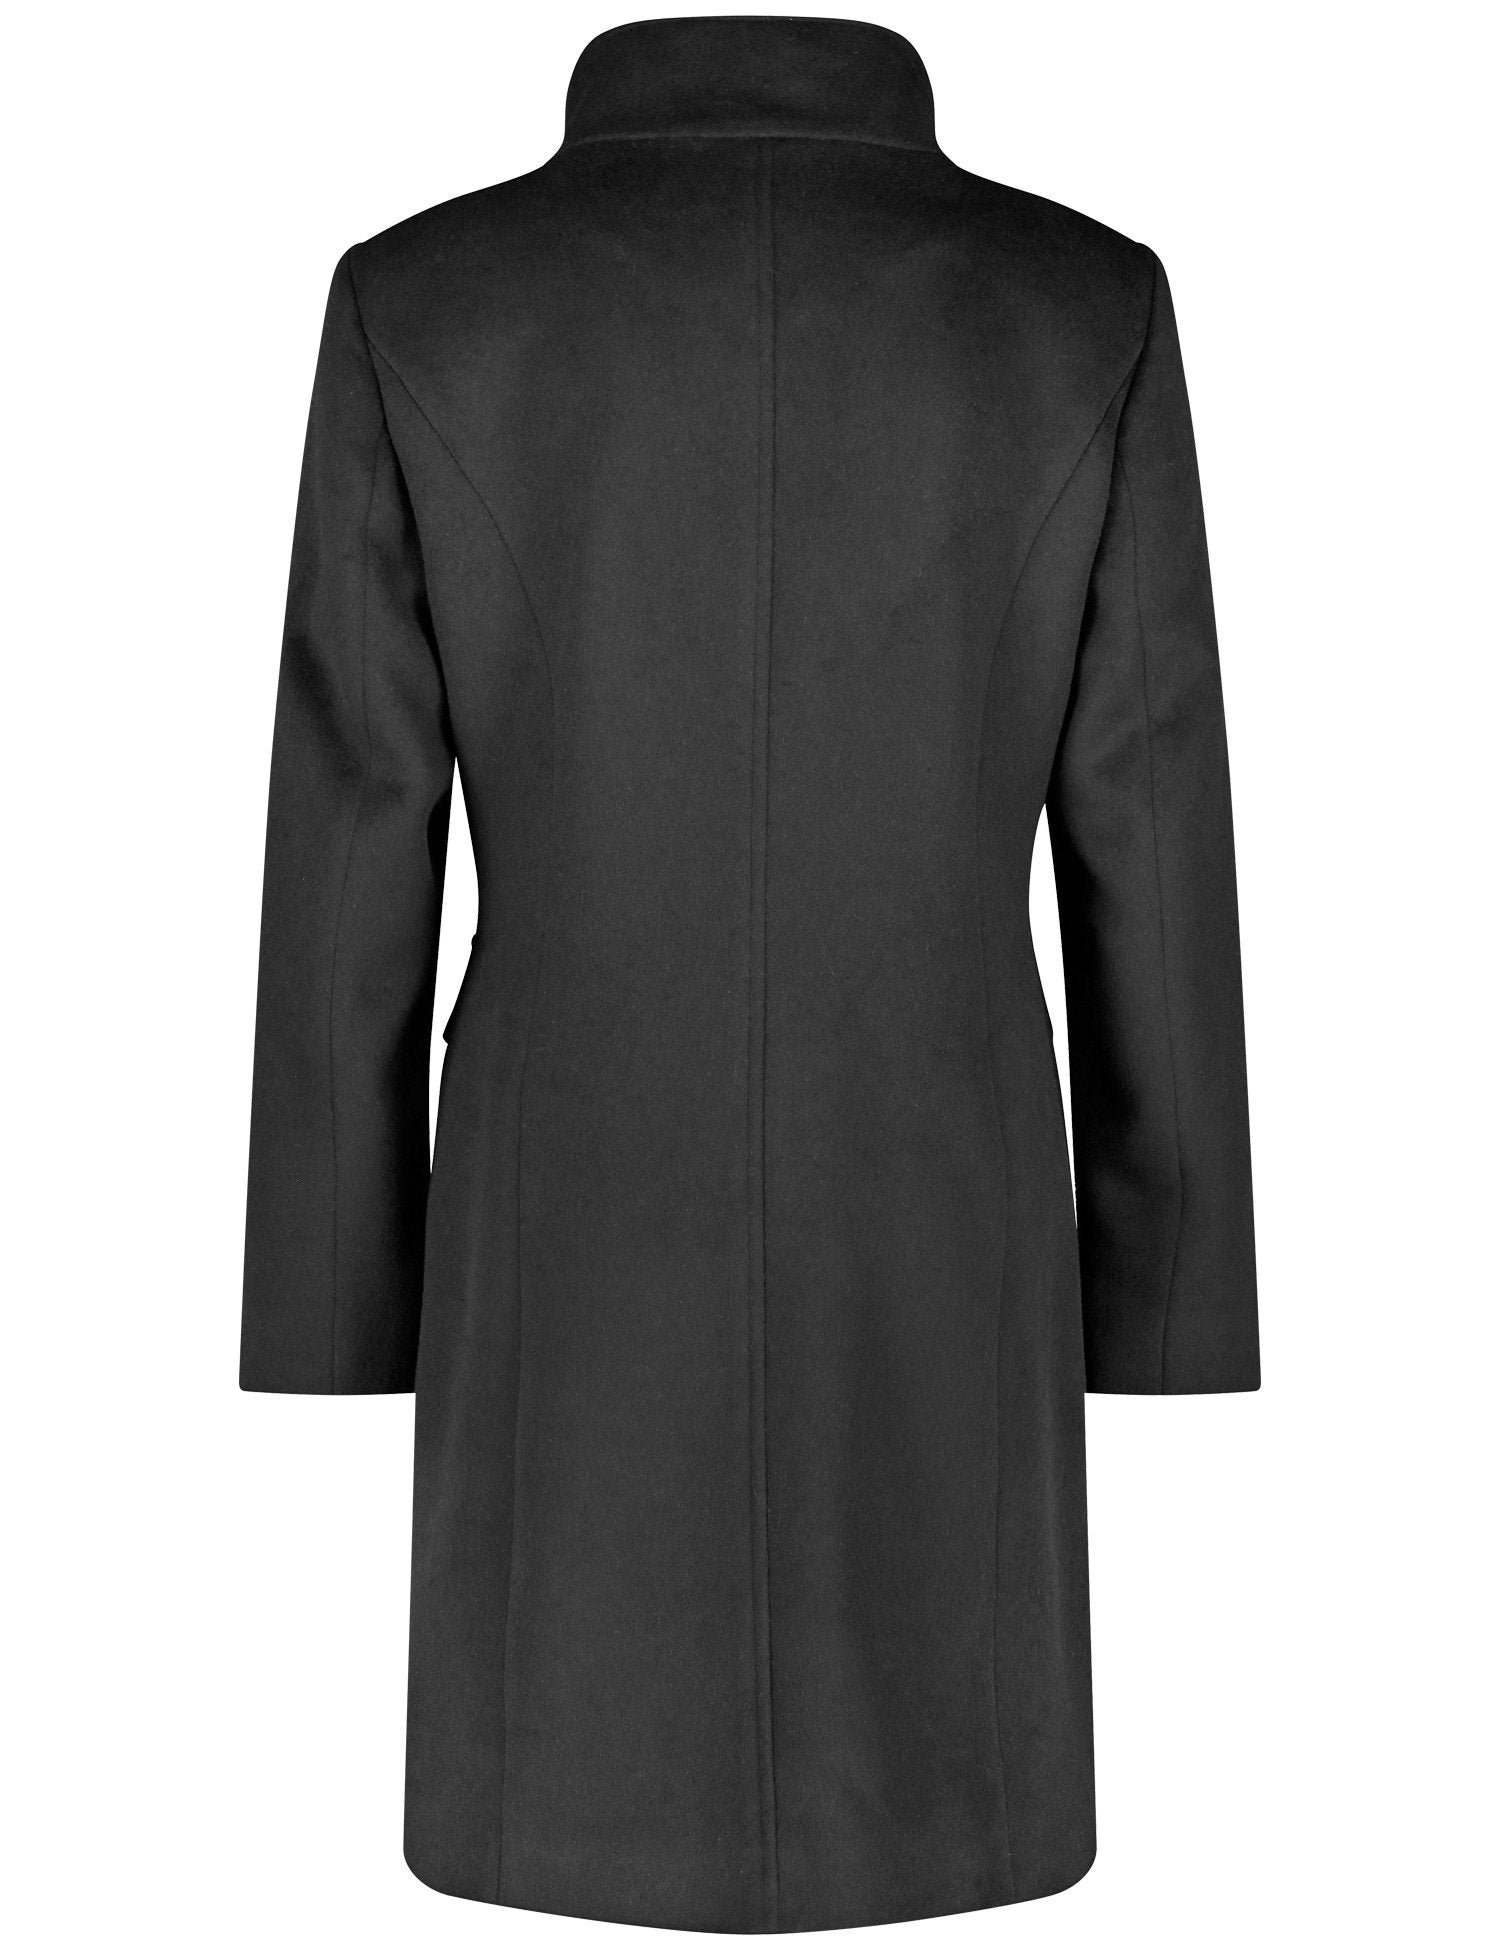 Short Wool Coat With A Stand Up Collar_250235-31131_11000_03